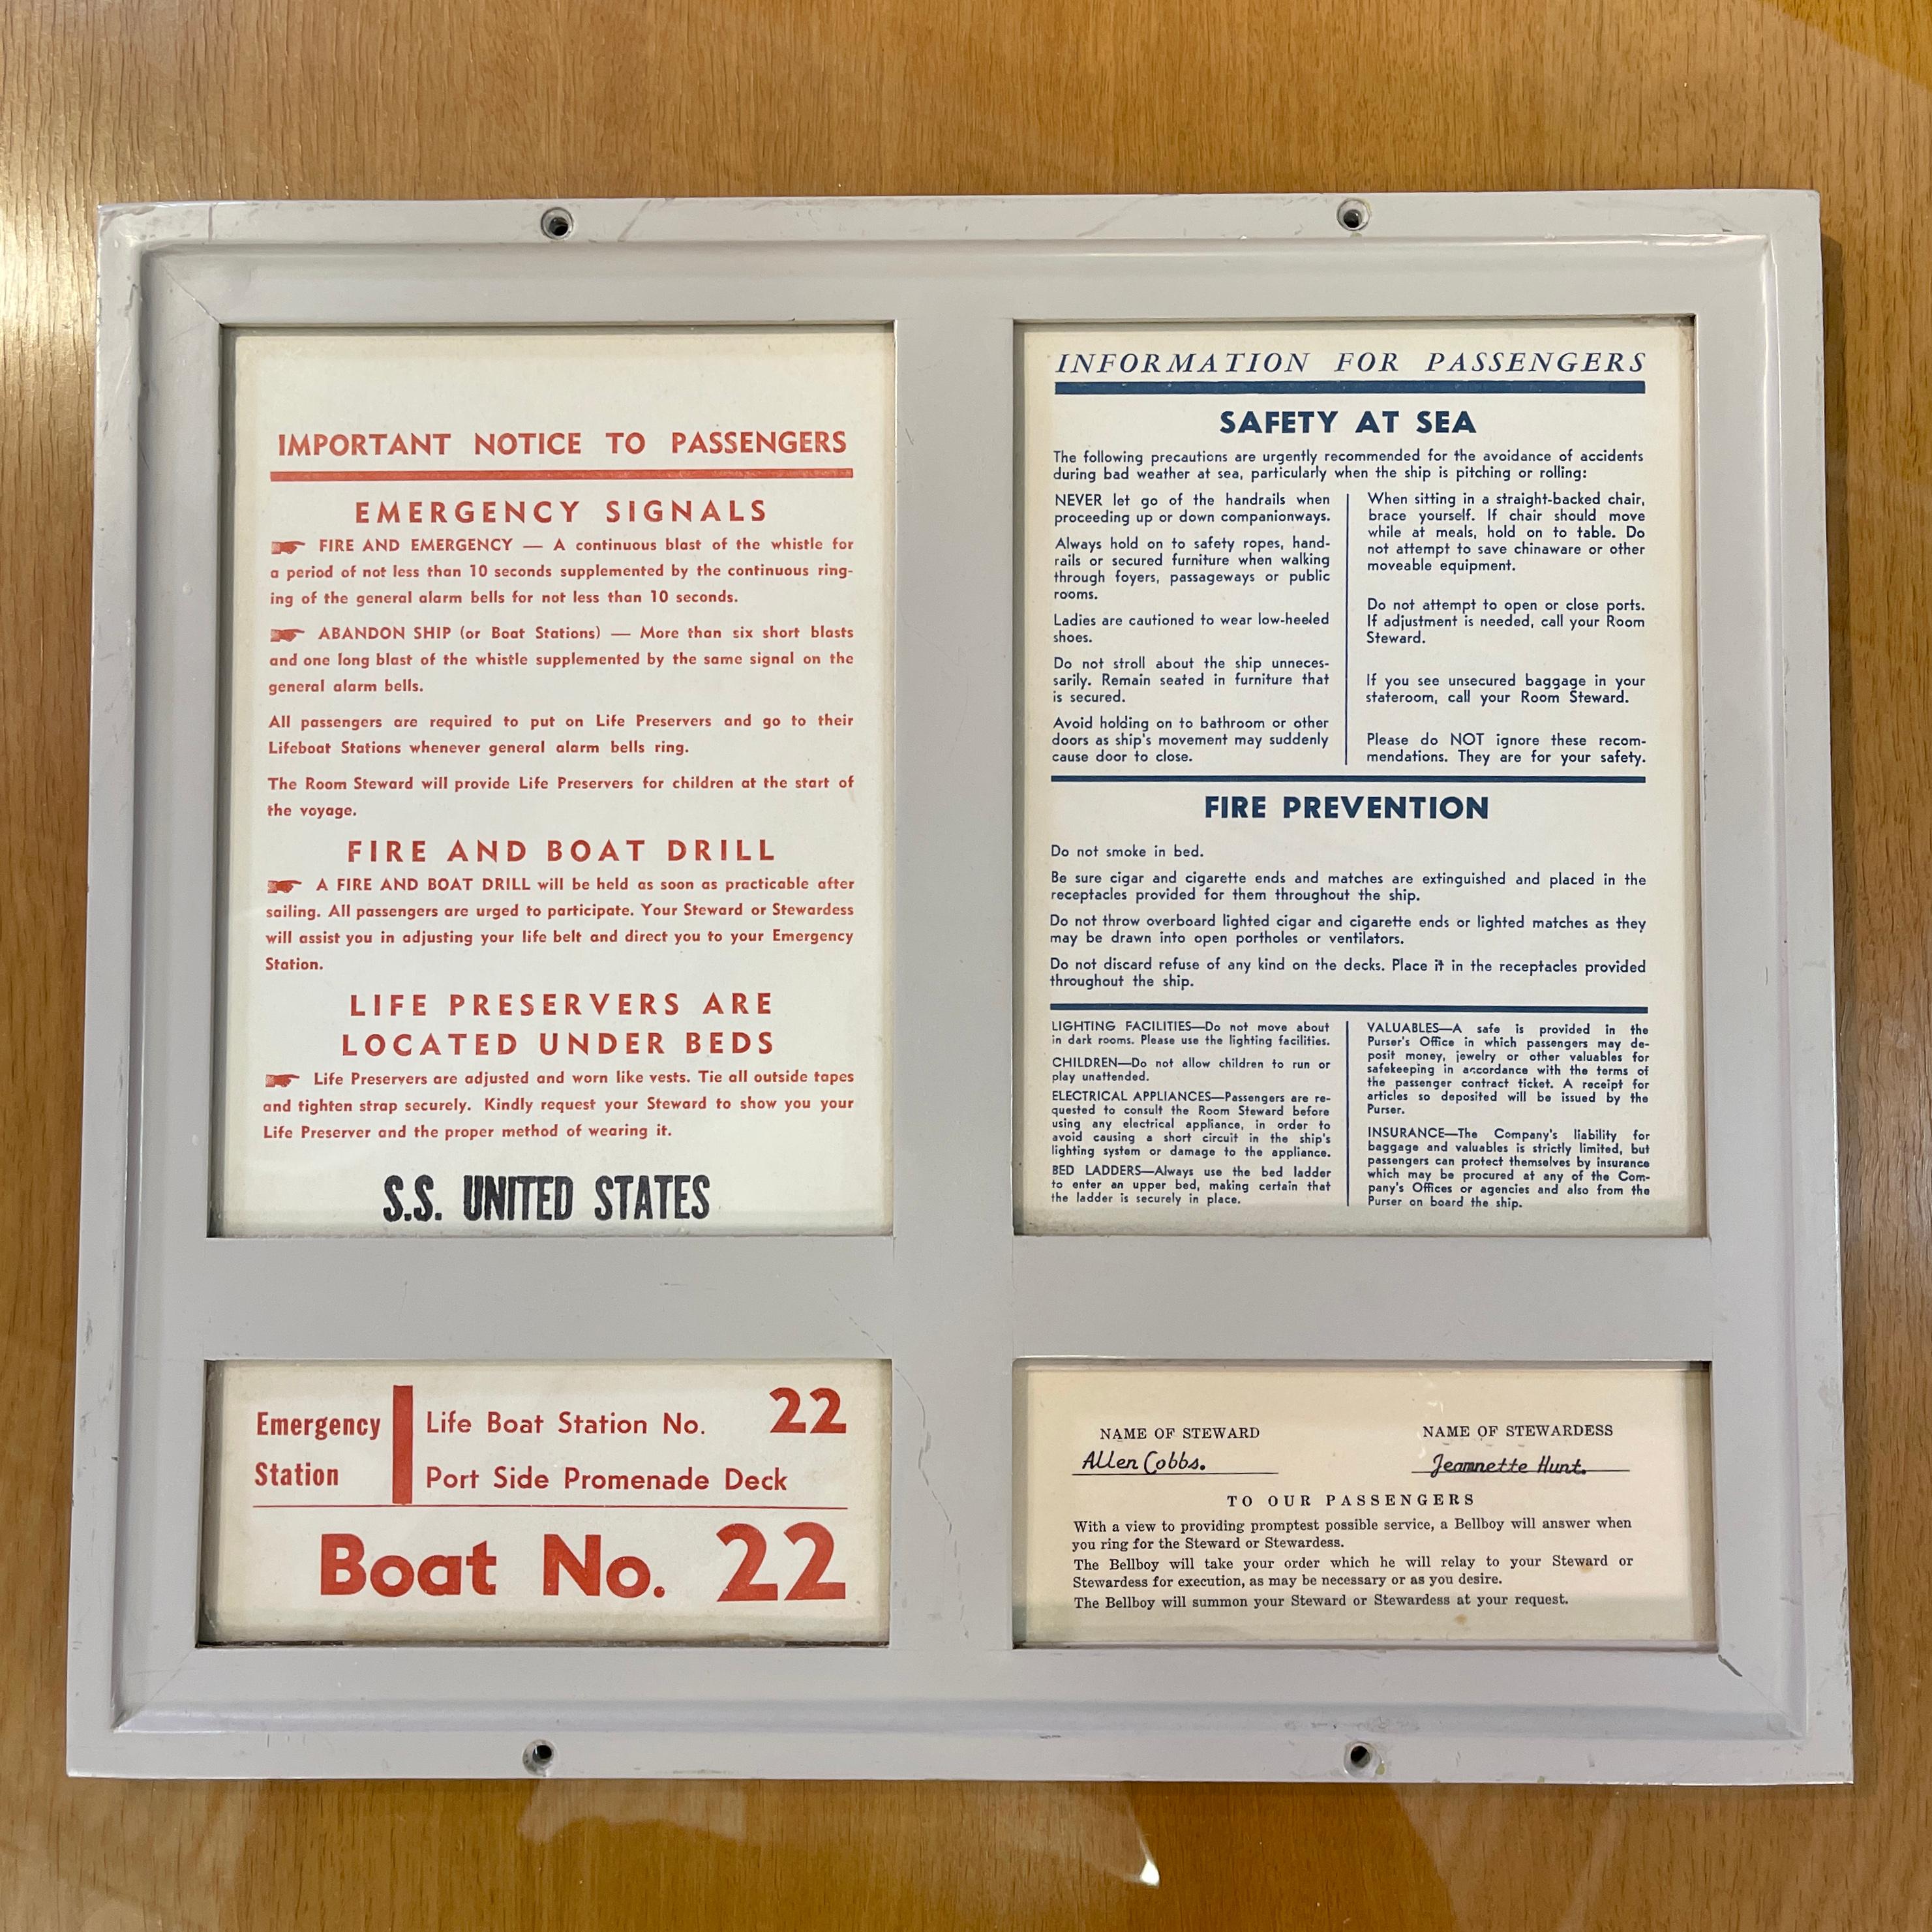 Hefty enameled solid aluminum framed passenger safety and information sign from Passenger Stateroom 139 on the Main deck of the SS United States. 
Four glass paned windows. Lower right window is a pull-out sign plate identifying that assigned to